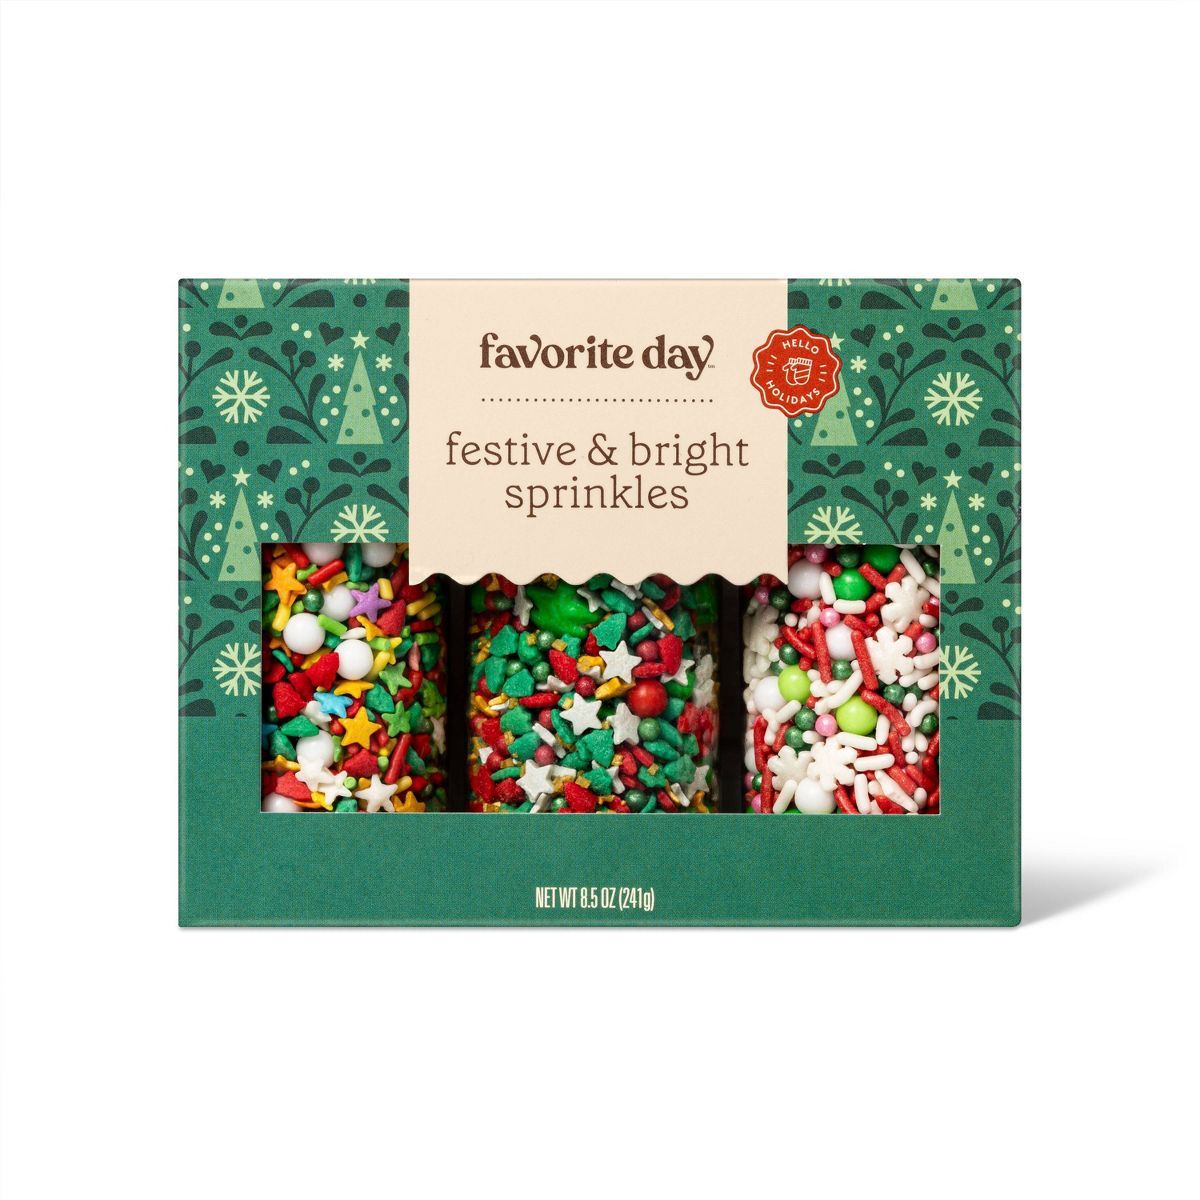 Holiday Festive & Bright Holiday Sprinkles - 8.5oz - Favorite Day™ | Target